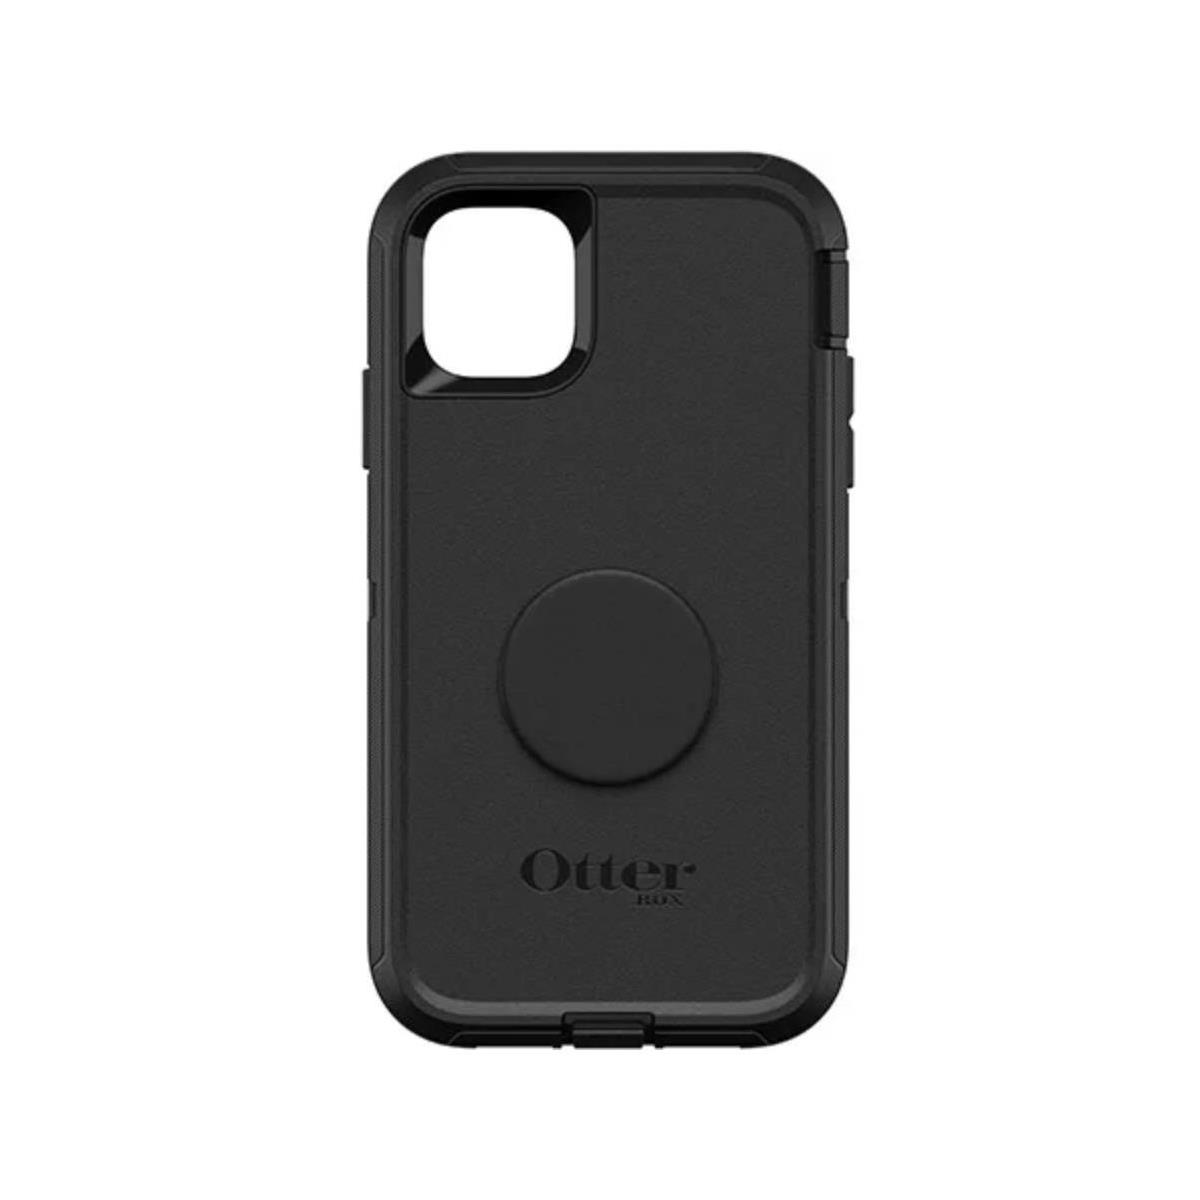 Image of OtterBox Otter + Pop Defender Case for iPhone 11